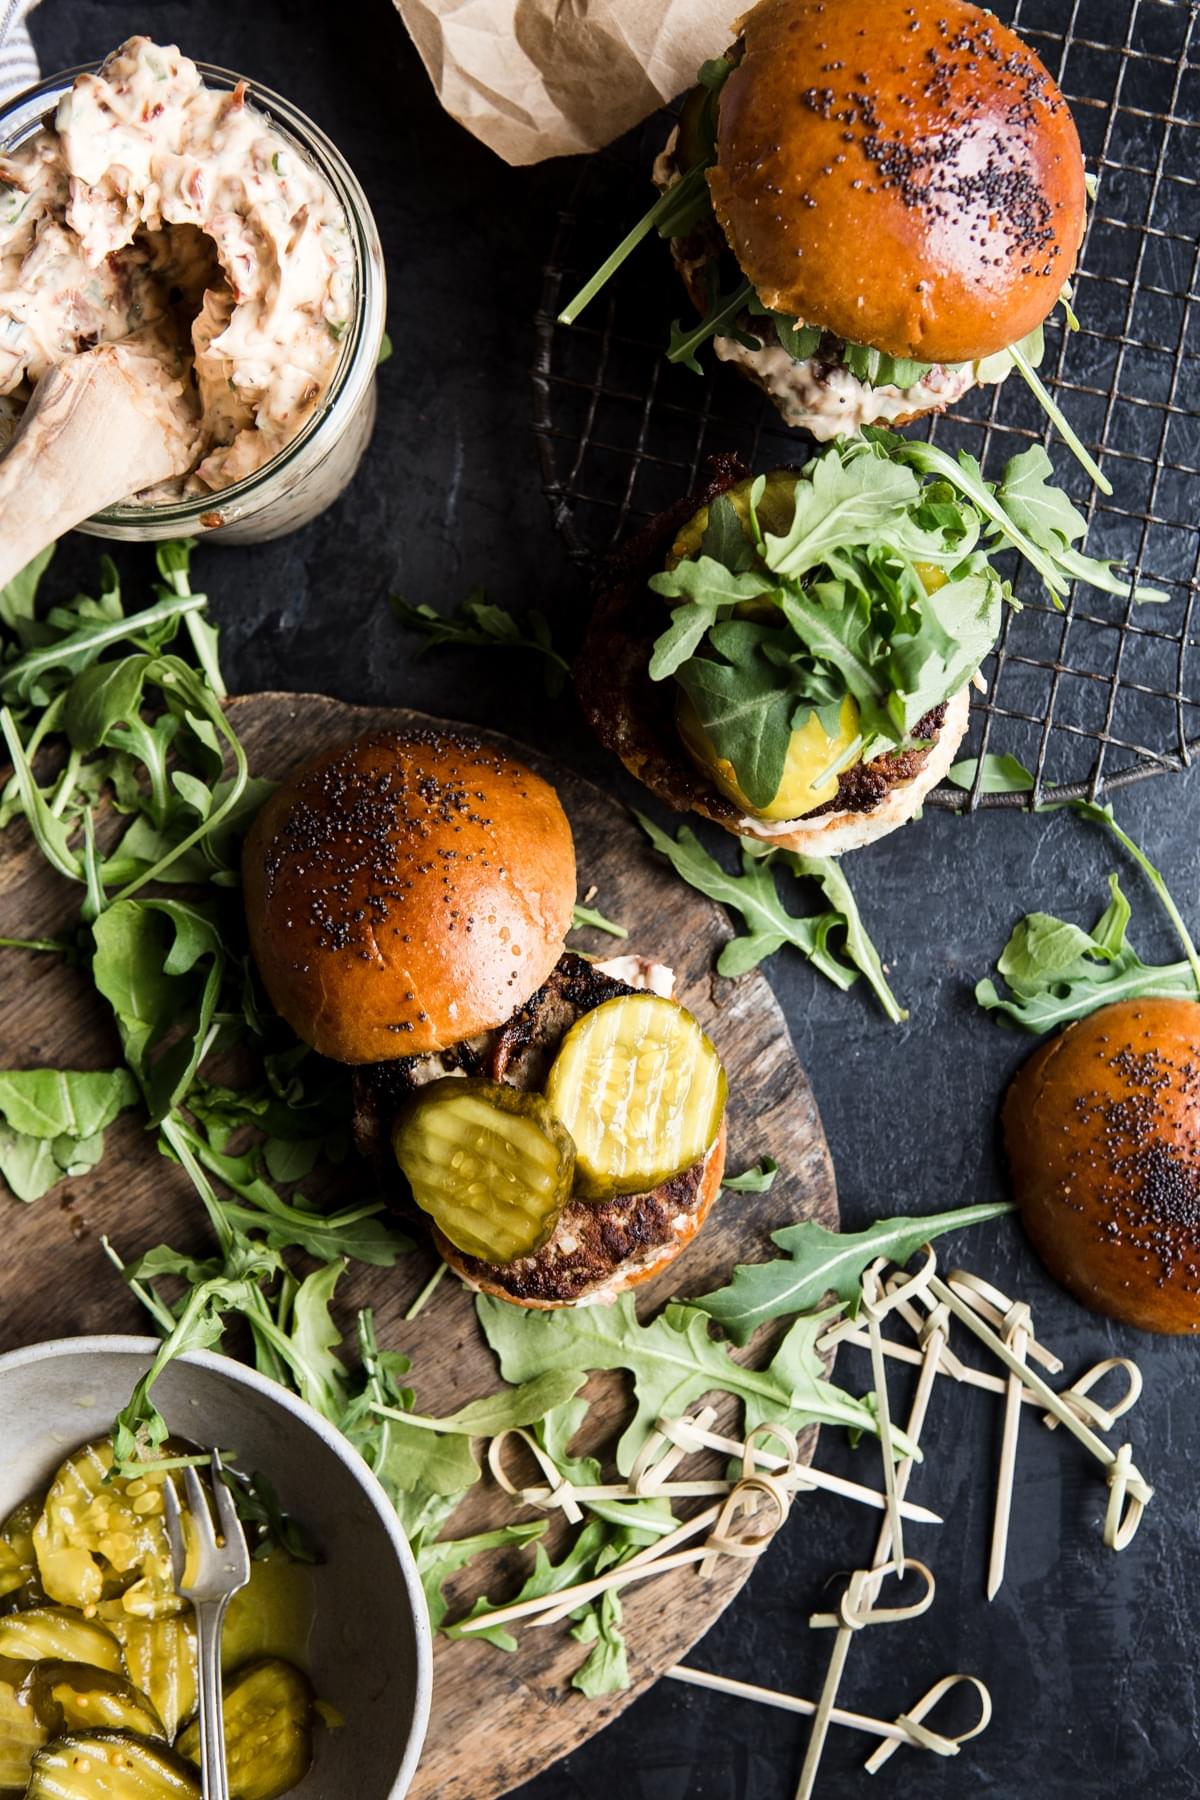 Beef sliders with sun-dried tomato mayo, arugula and sweet and spicy pickles being assembled.